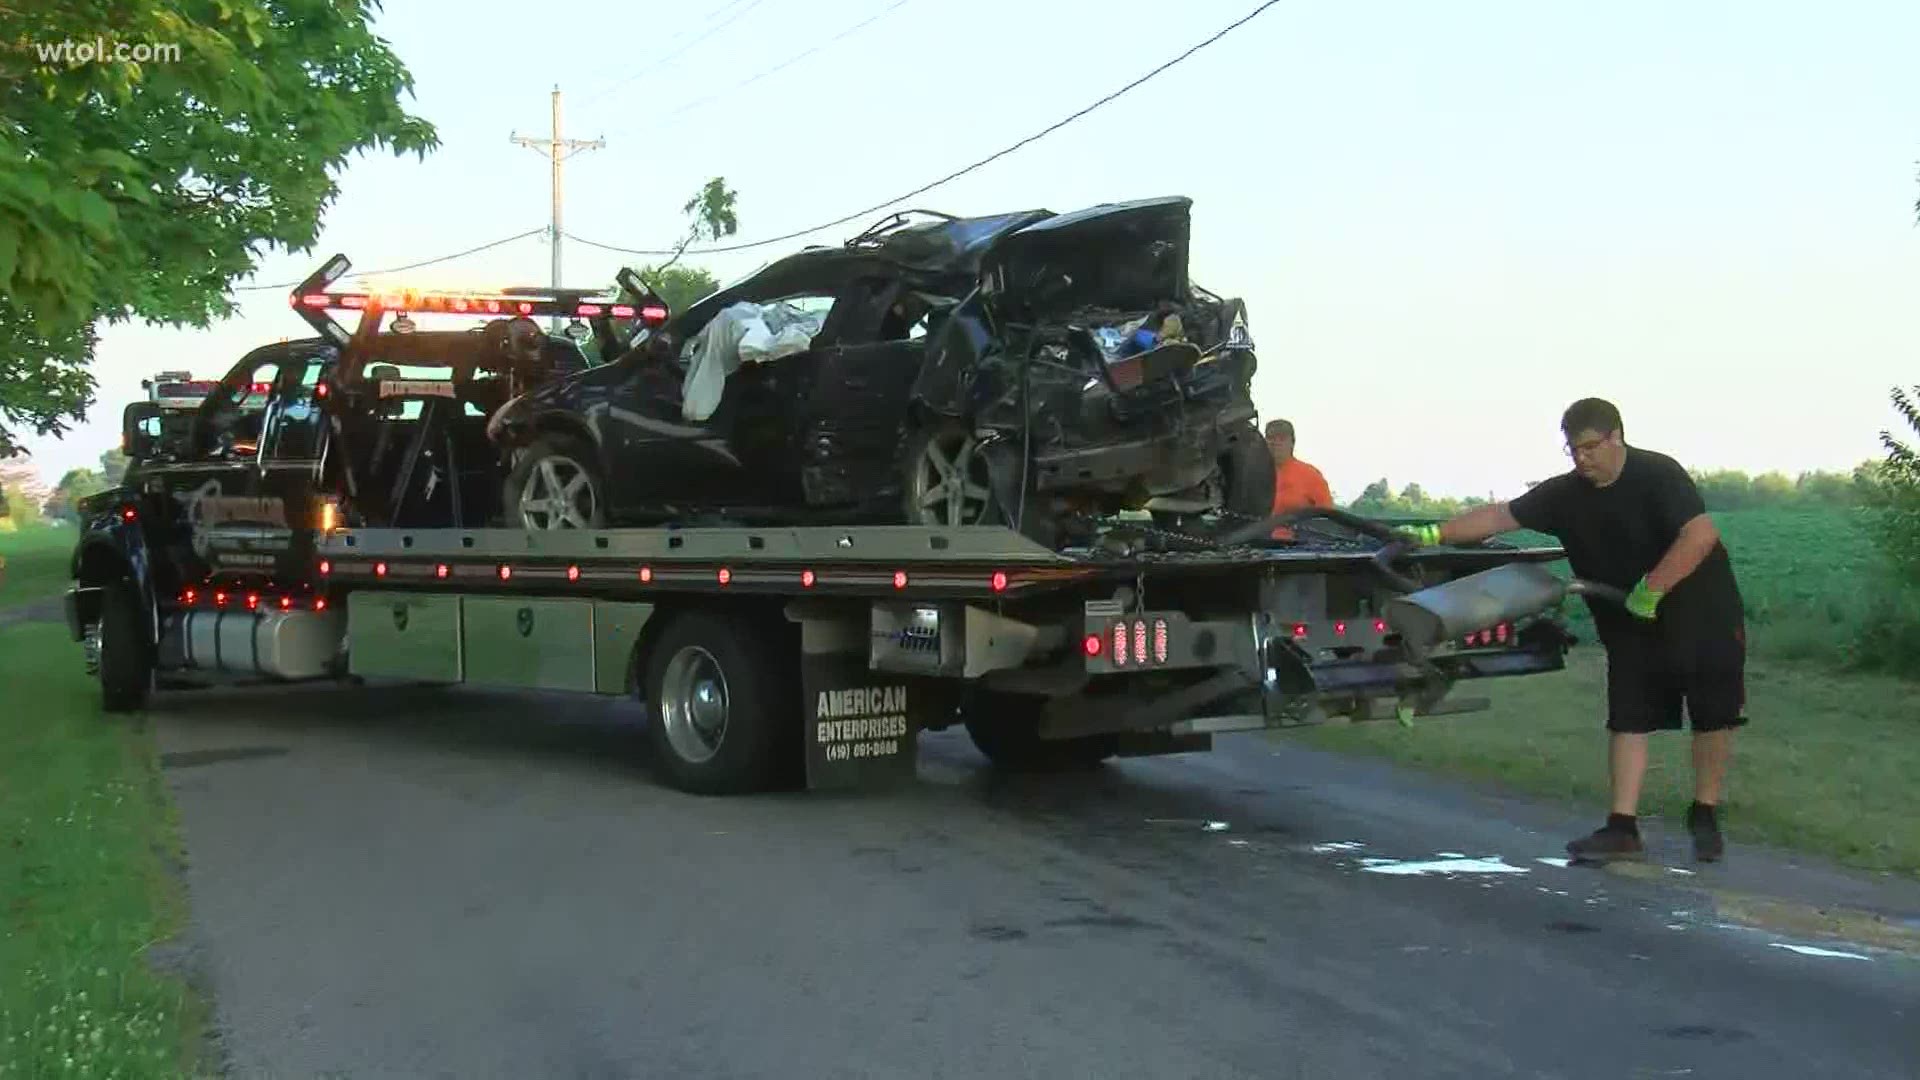 Those in the area of the crash say it was a head-on collision involving a couple and a baby.